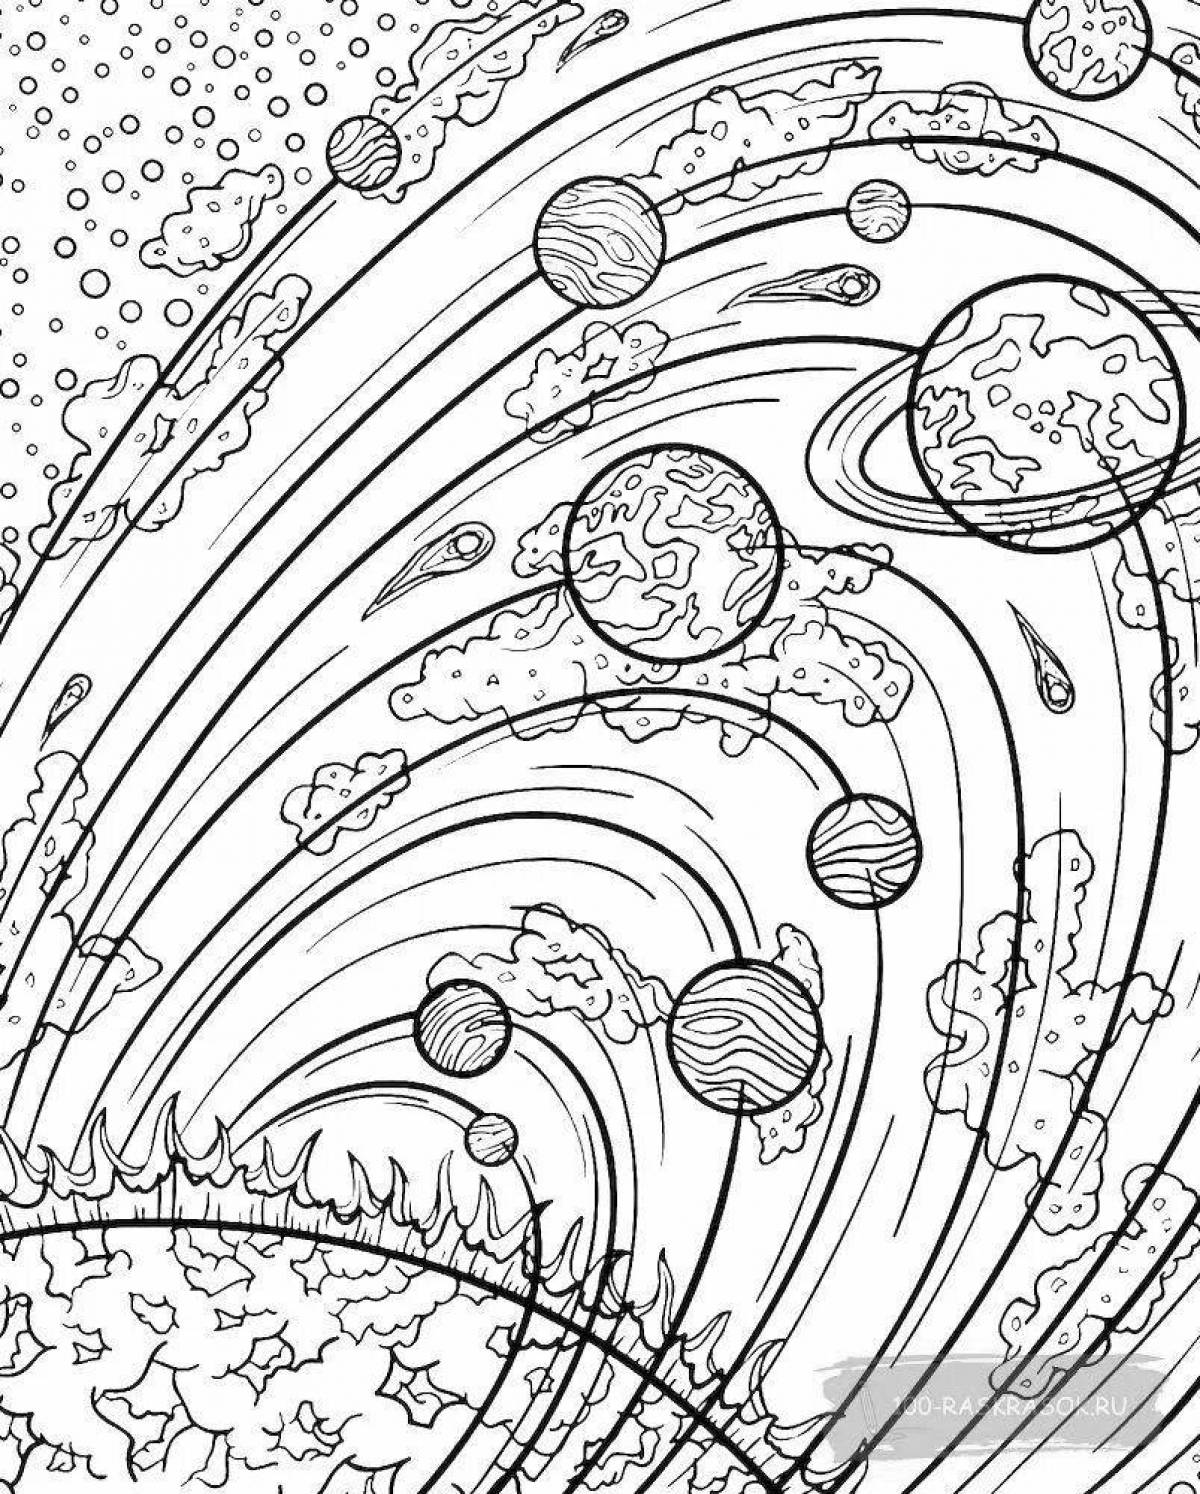 Amazing coloring pages animals in orbit